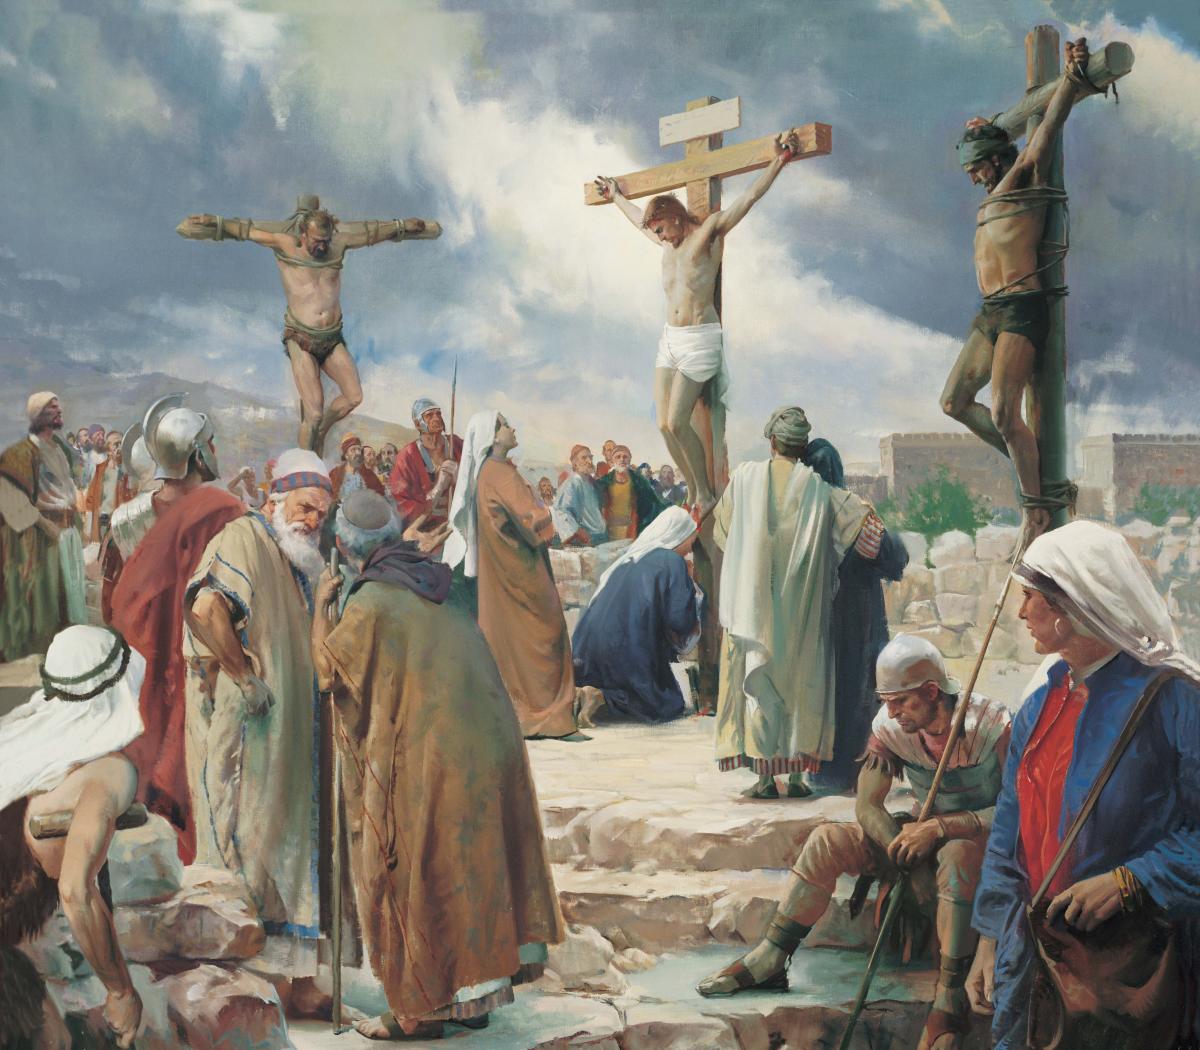 "The Crucifixion" by Harry Anderson